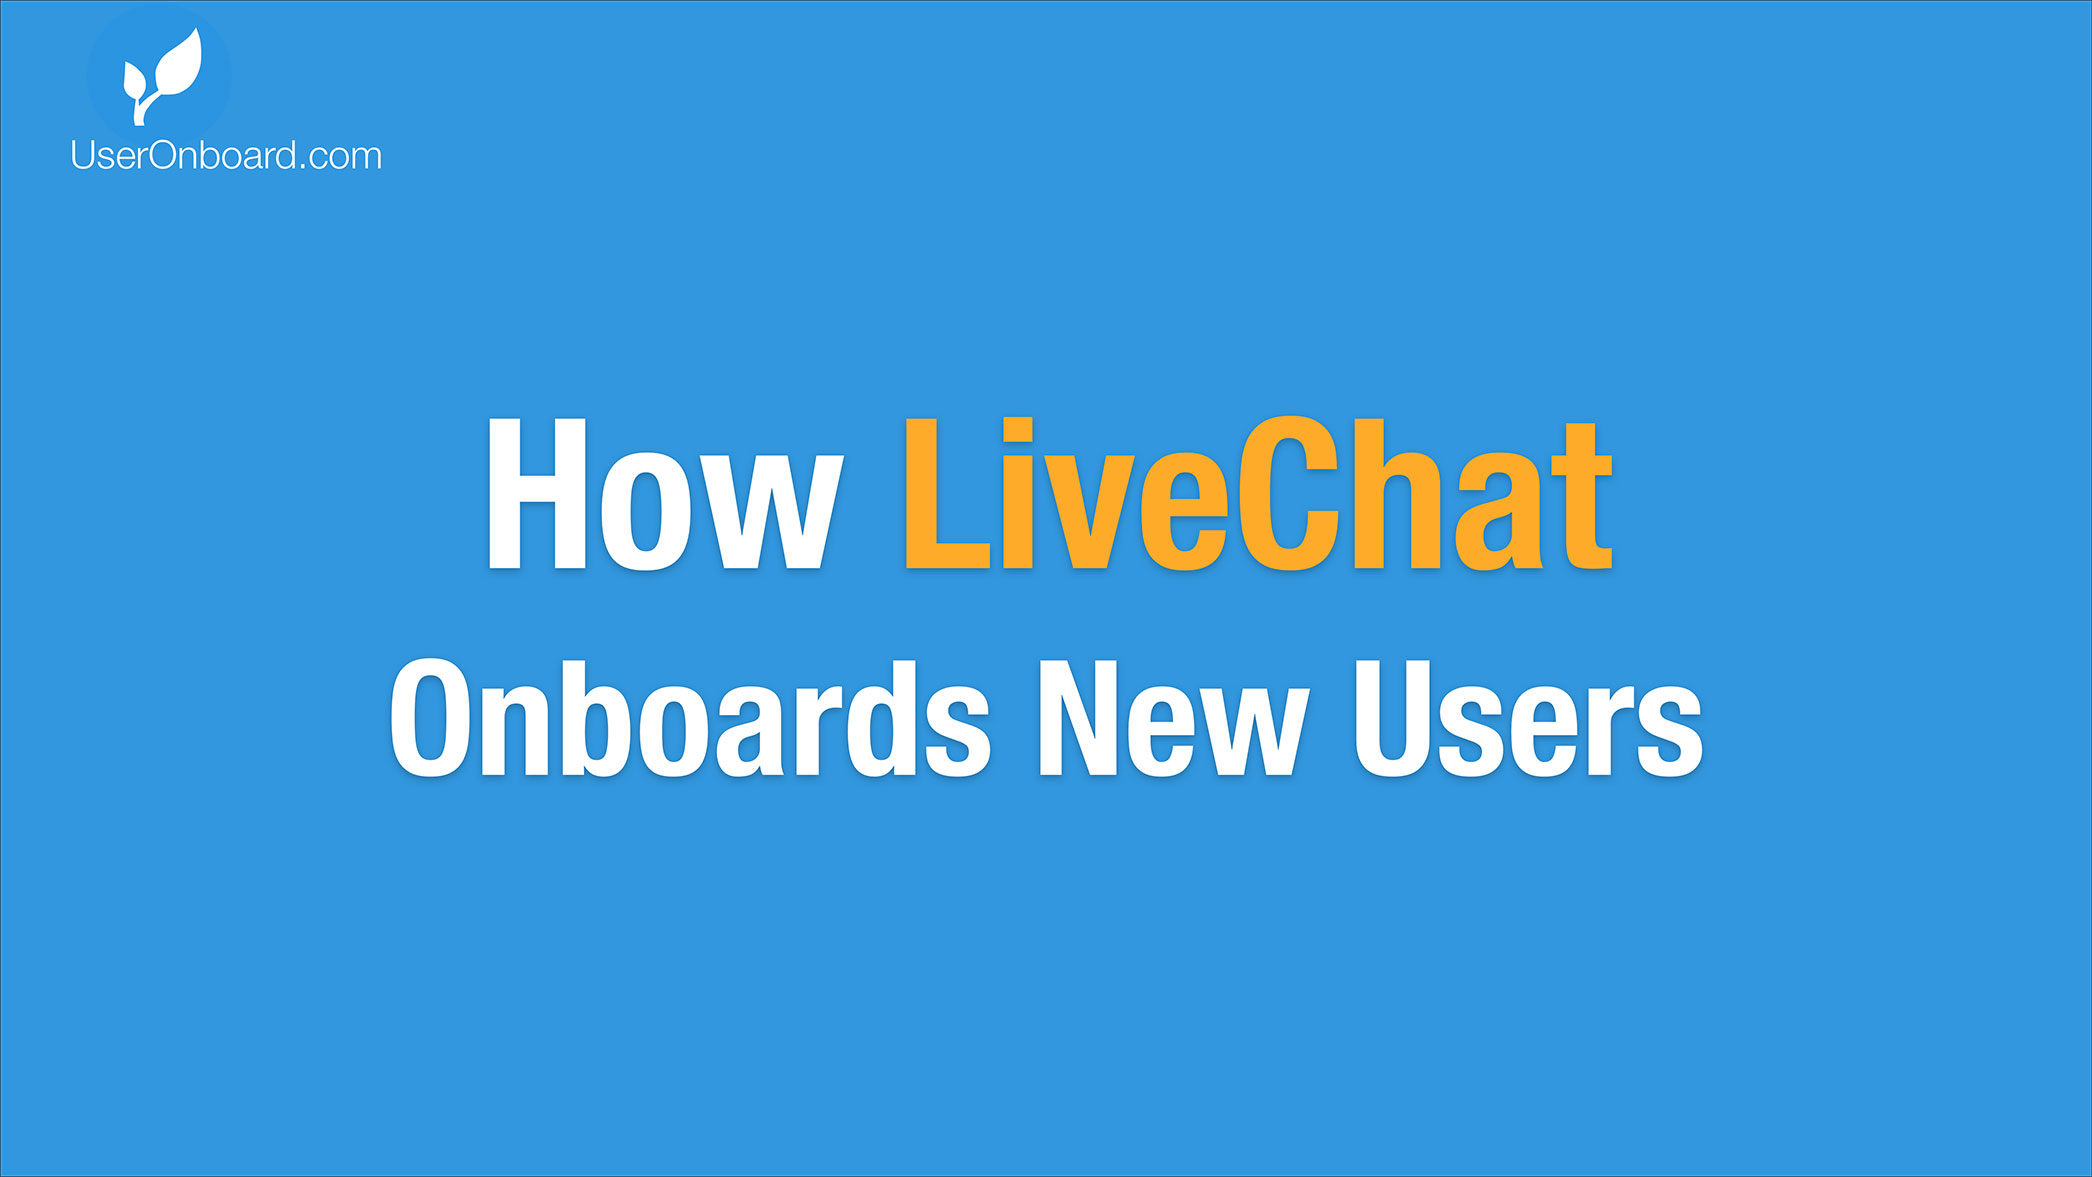 LiveChat onboarding